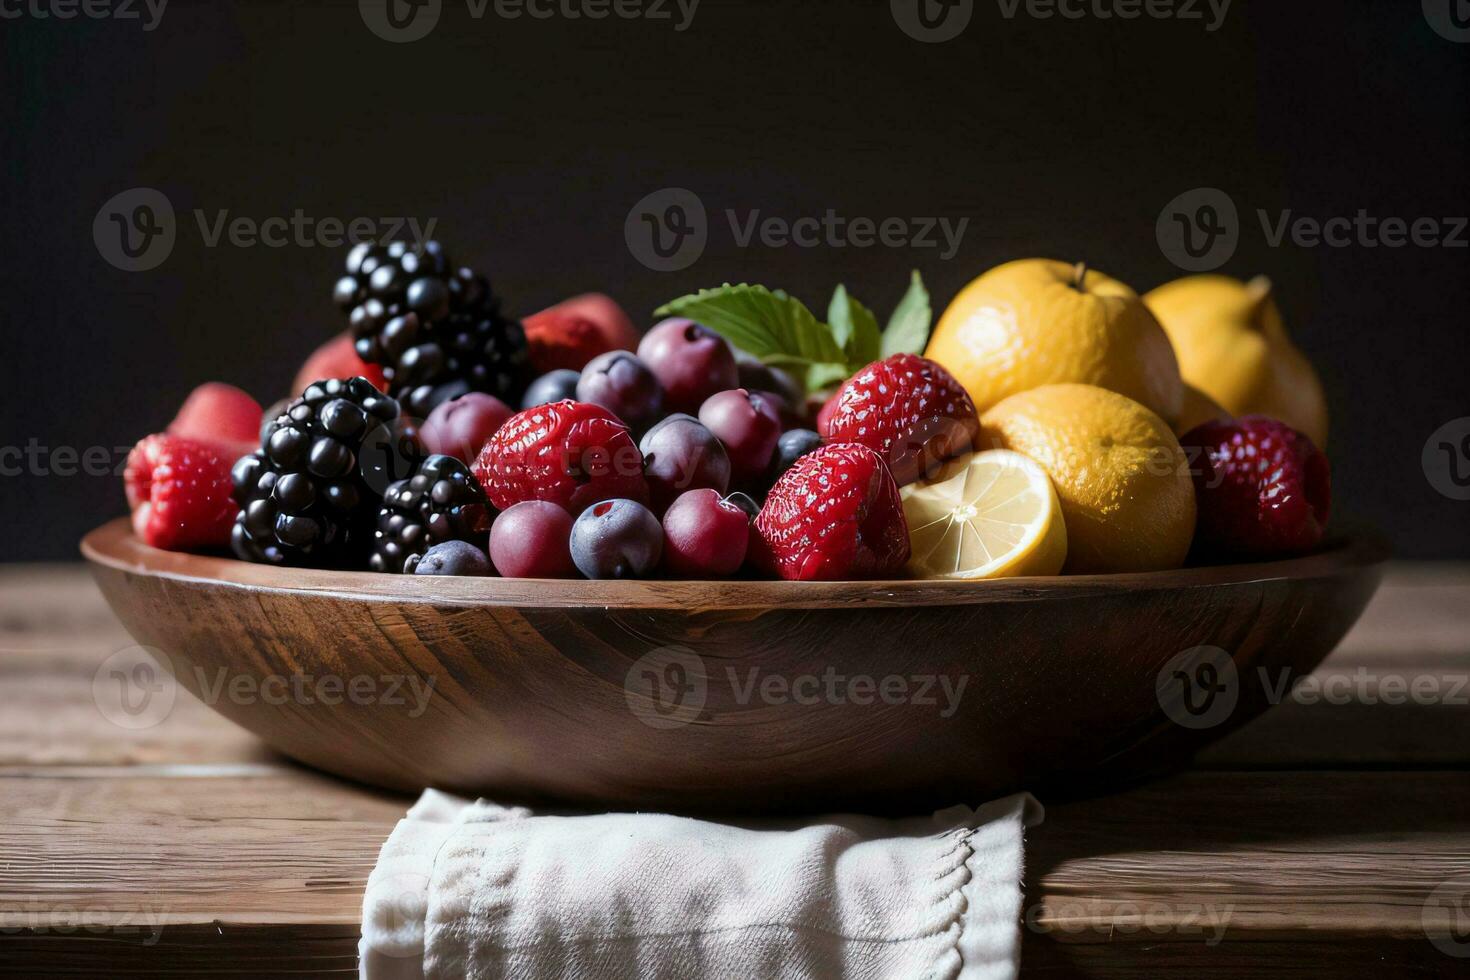 Studio Shot of the basket with berries and fruits on the table photo